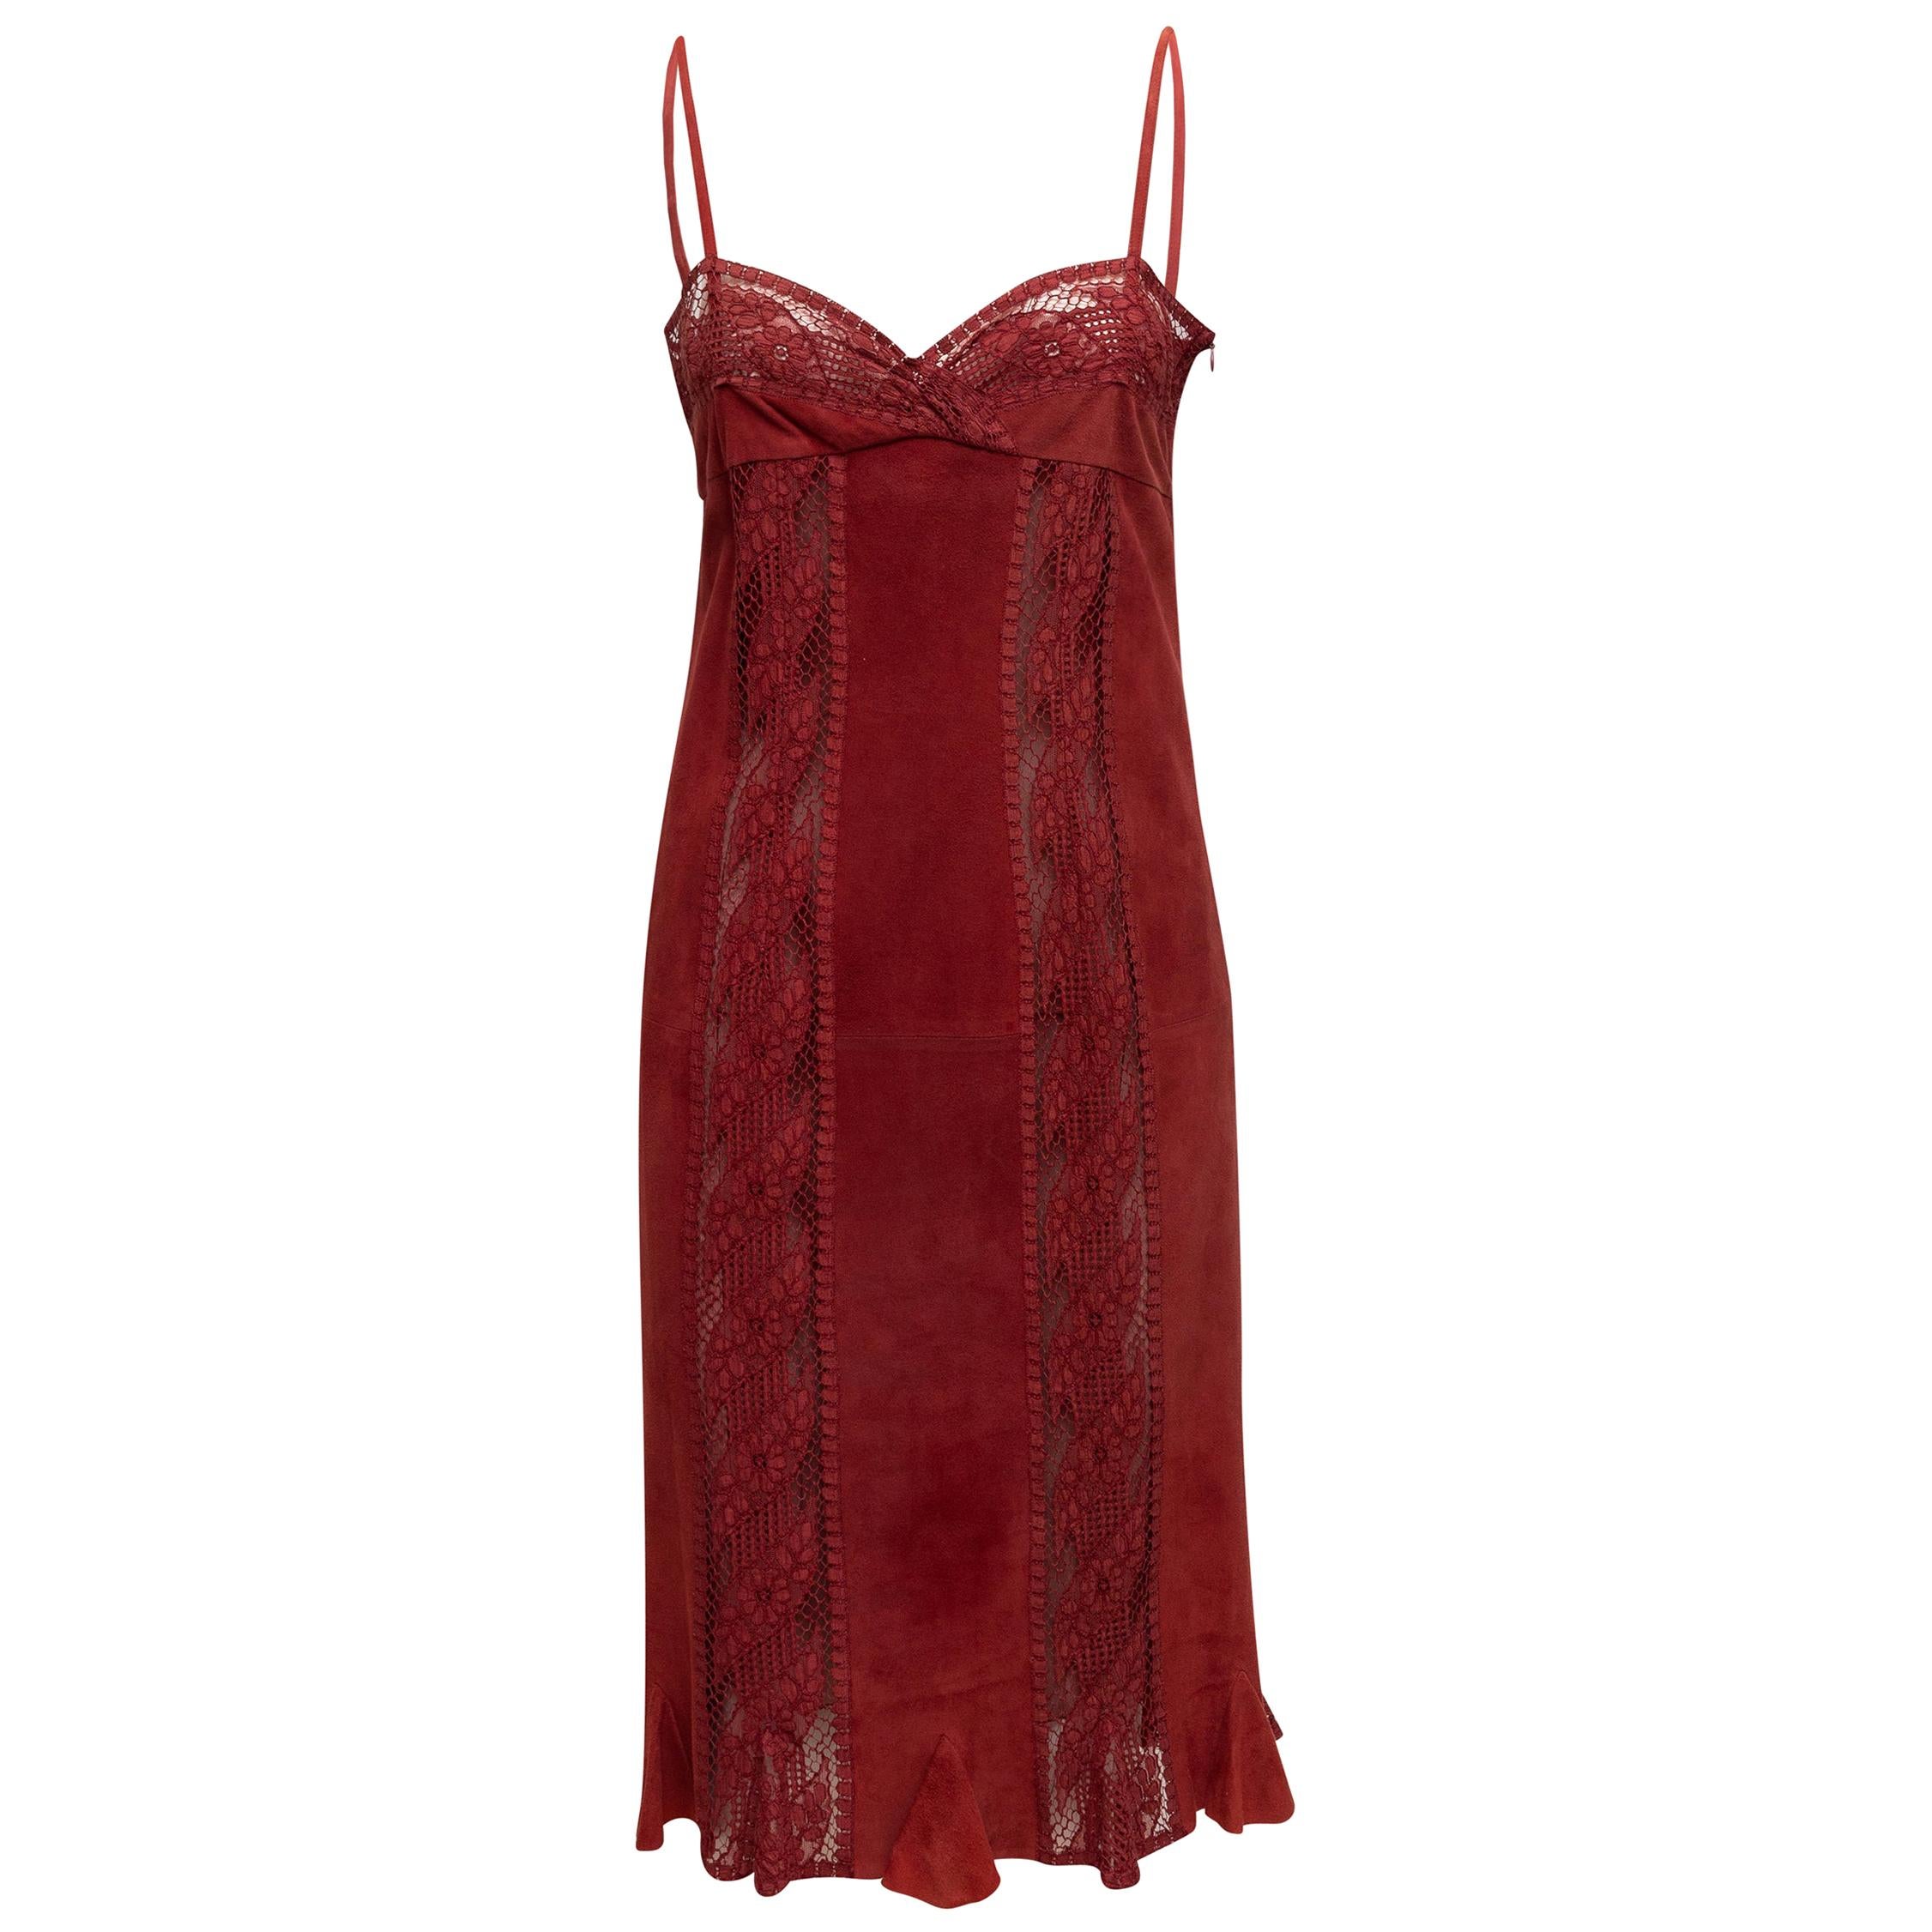 Valentino Boutique Red Suede & Lace Sleeveless Dress